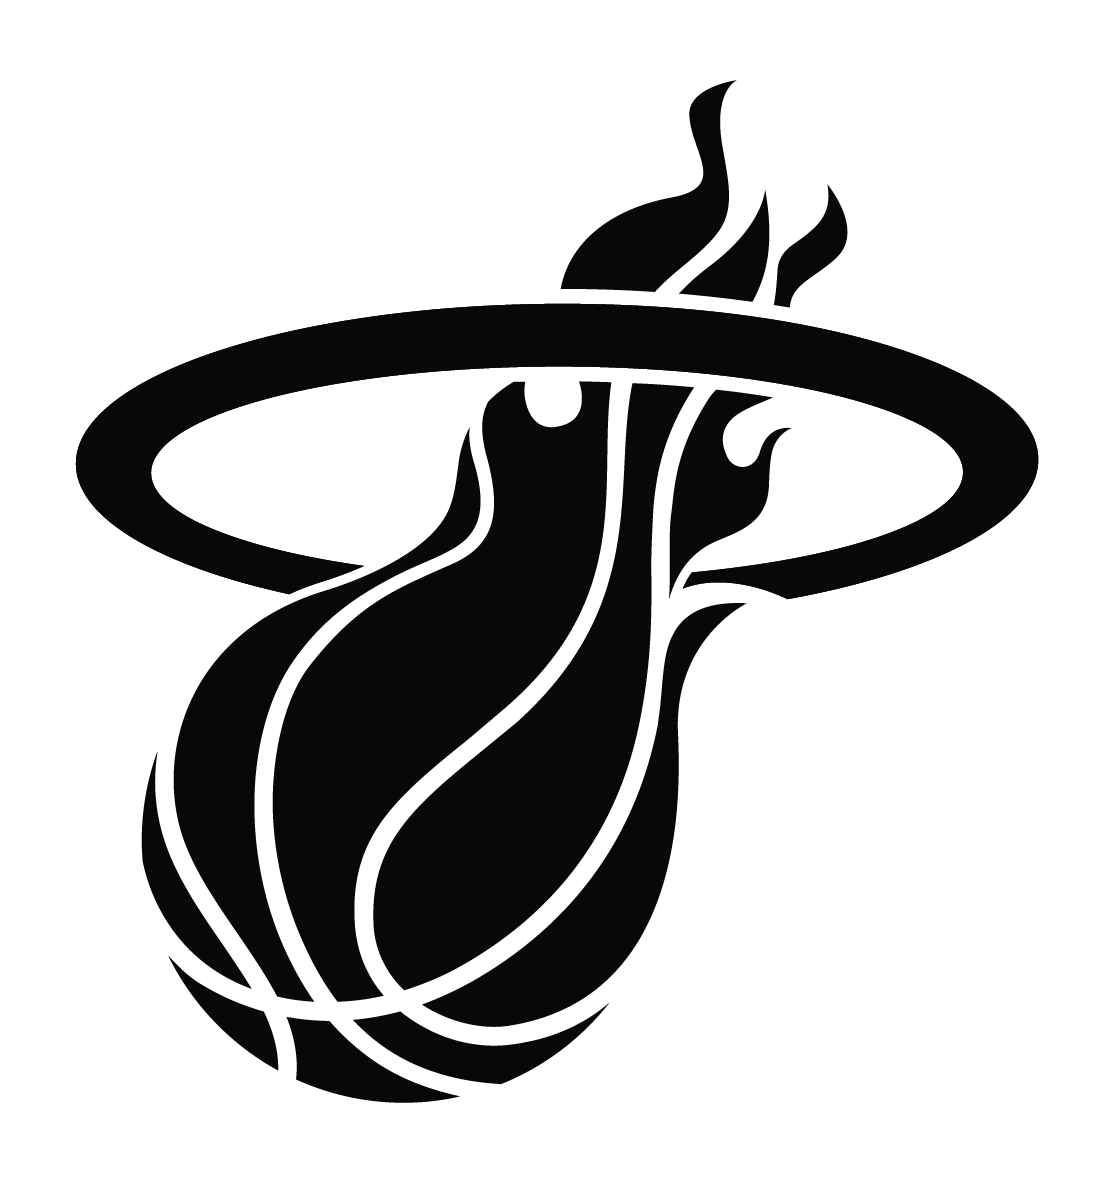 0 Result Images of Miami Heat Logo Png Transparent - PNG Image Collection